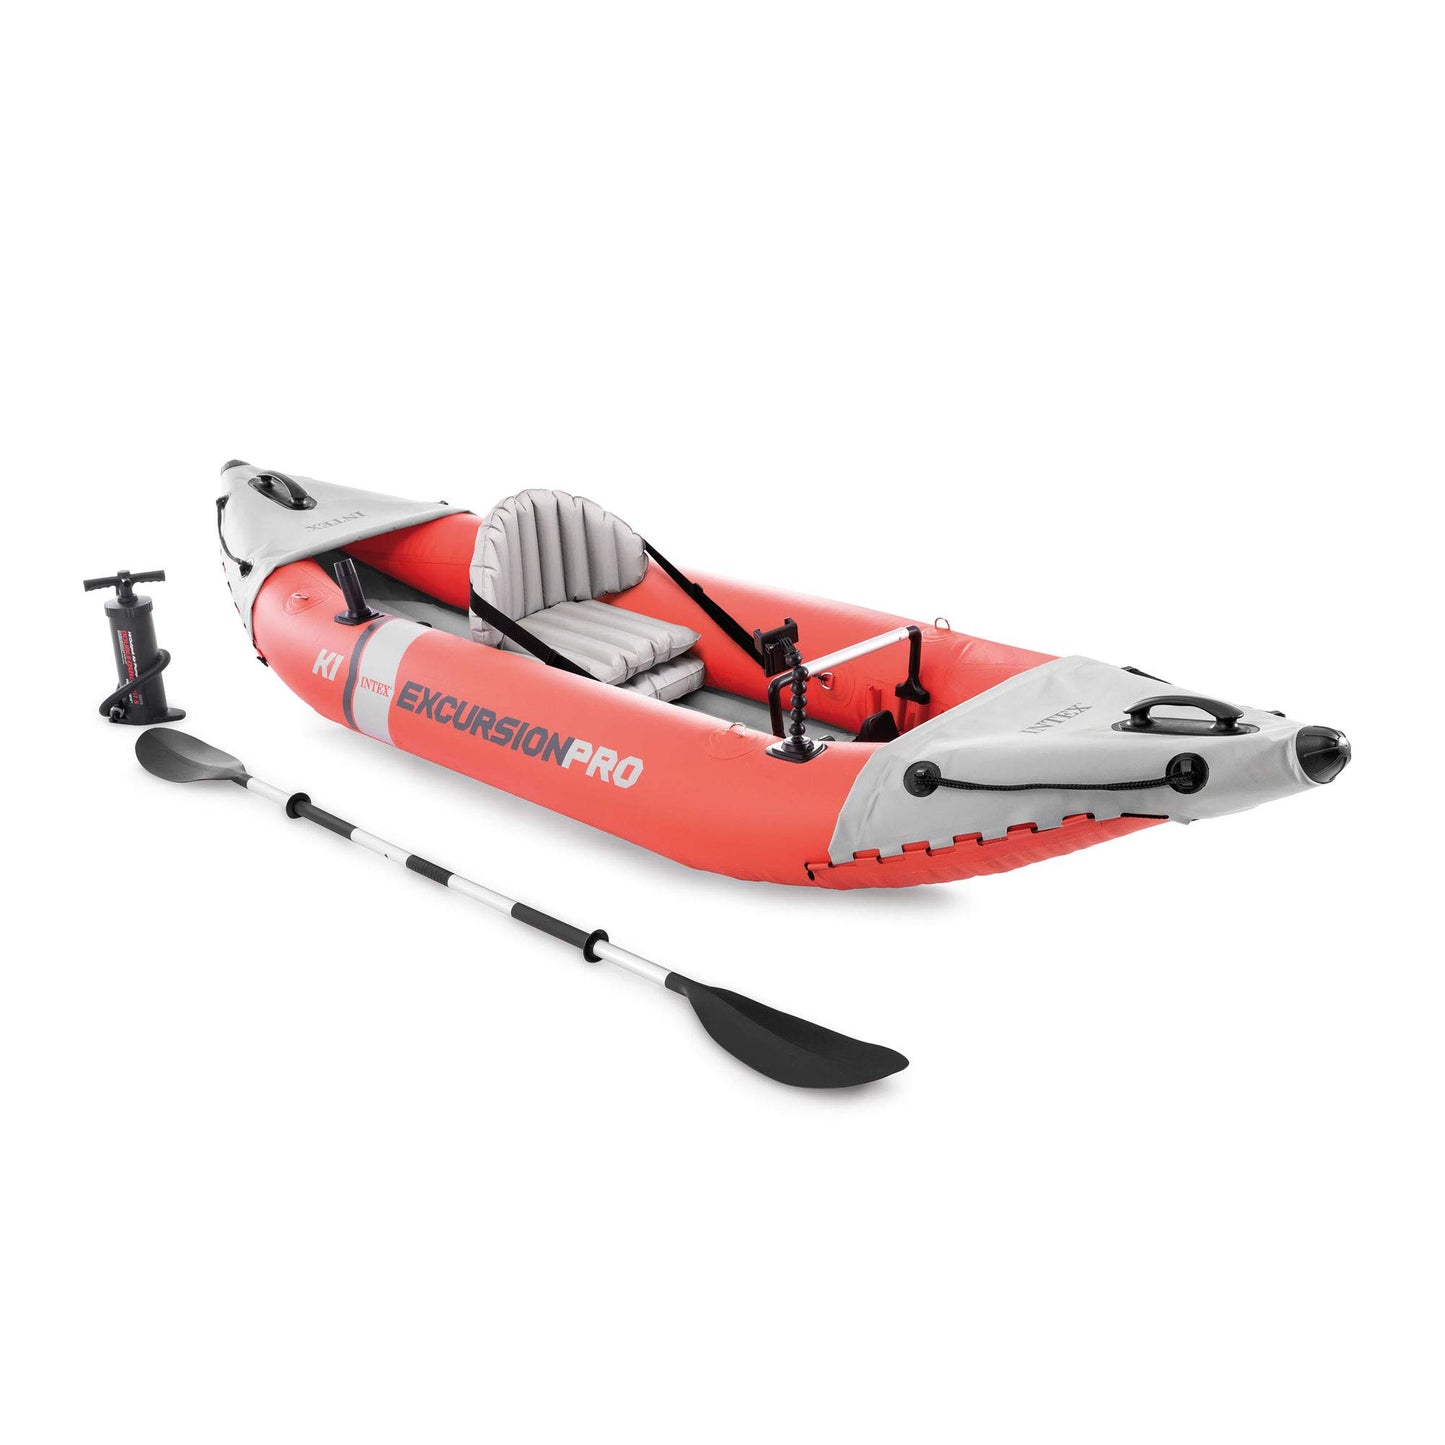 Intex - Excursion Pro Kayak Inflatable Boat - 4 Pieces